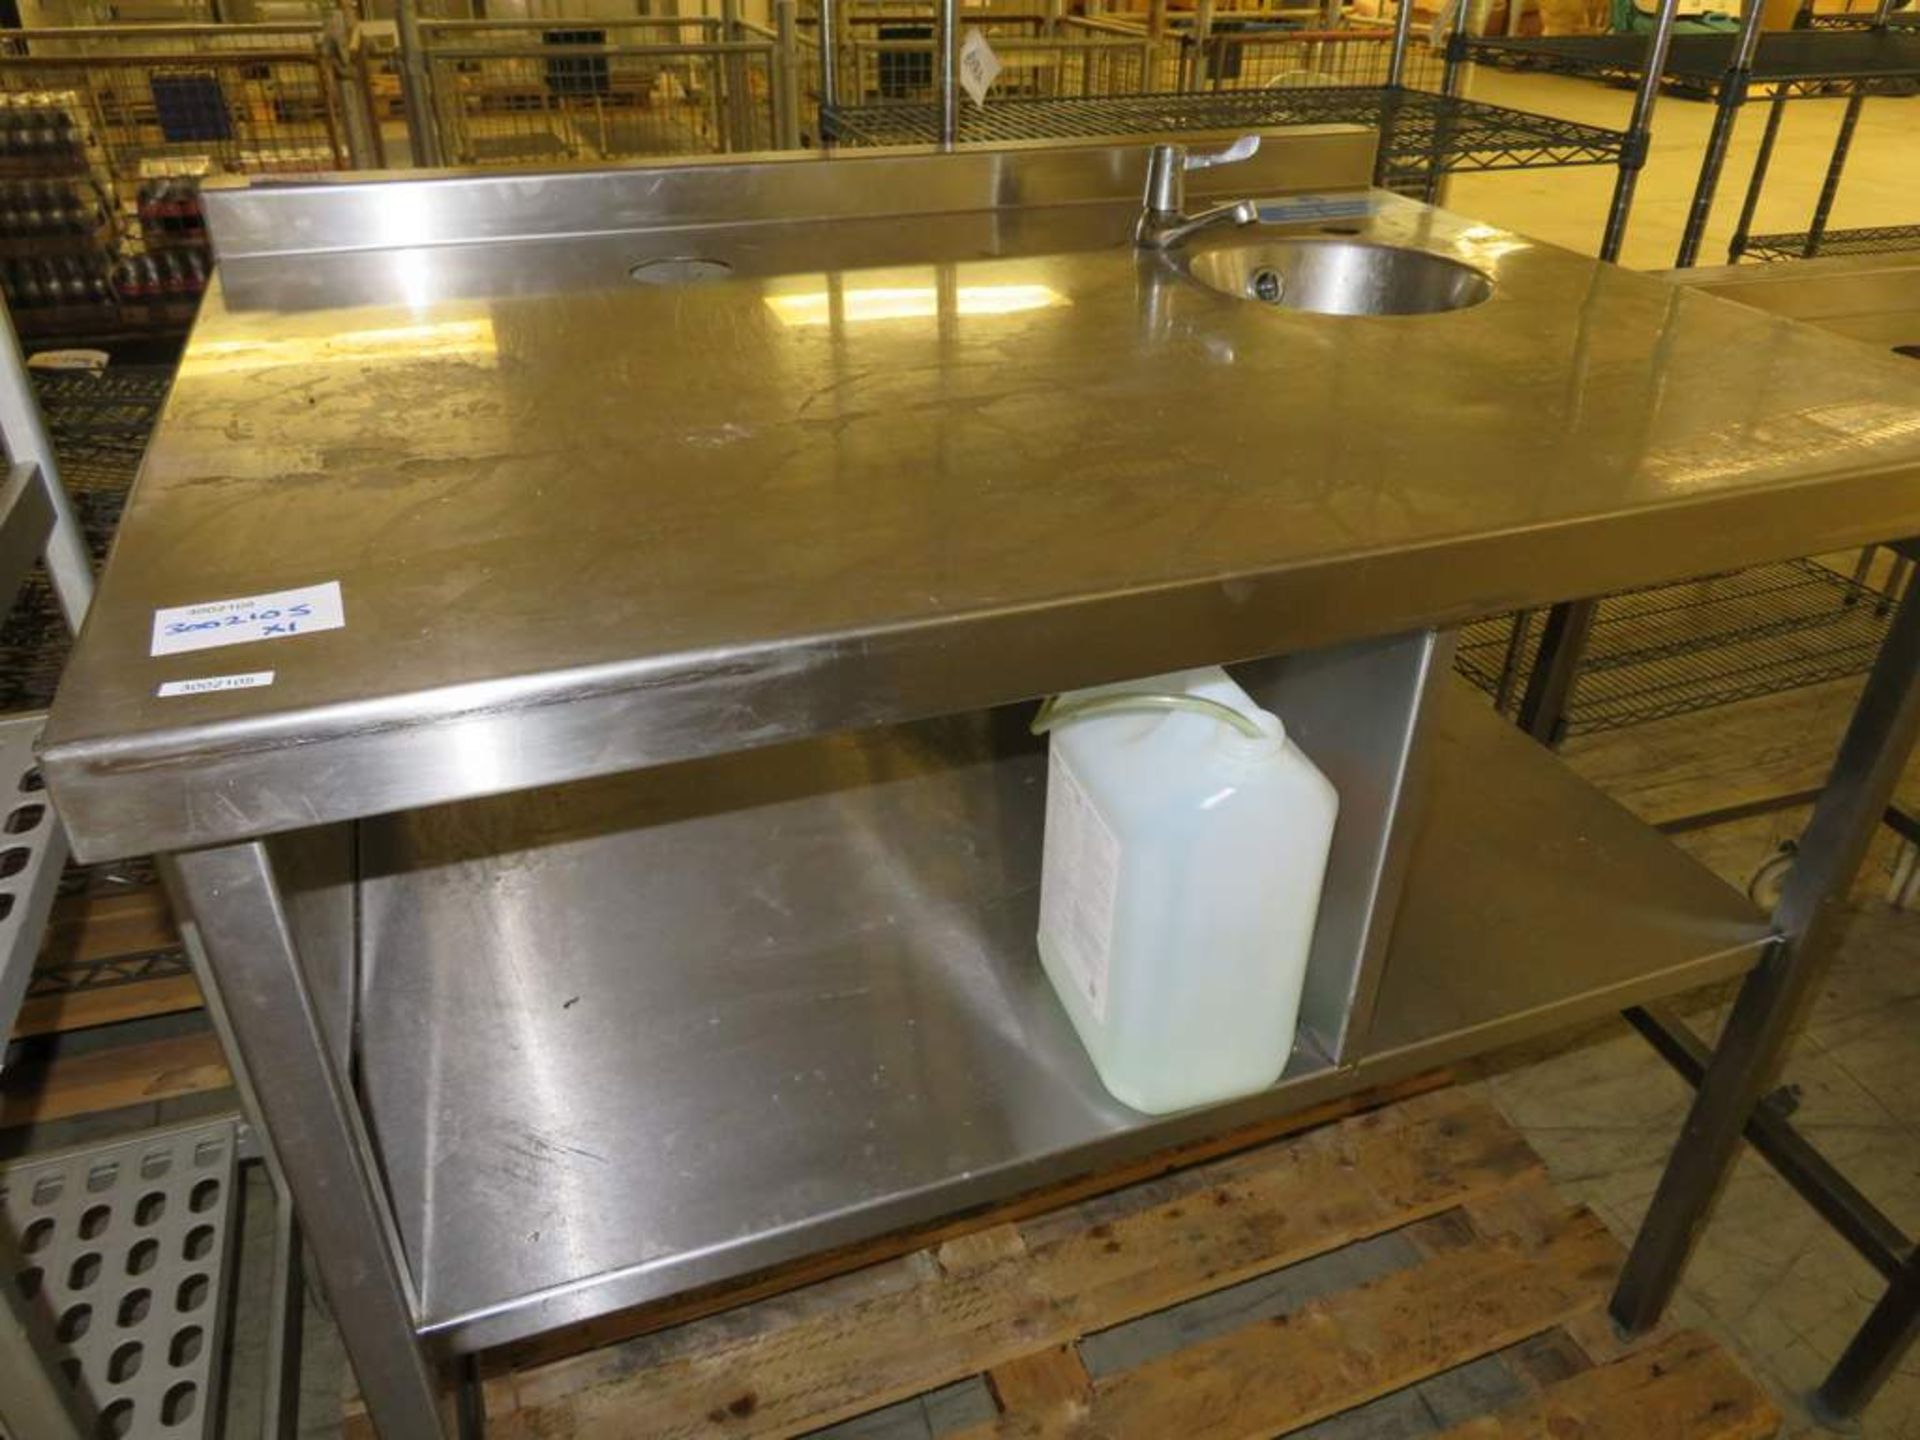 Stainless steel kitchen preparation table with sink - Image 3 of 3